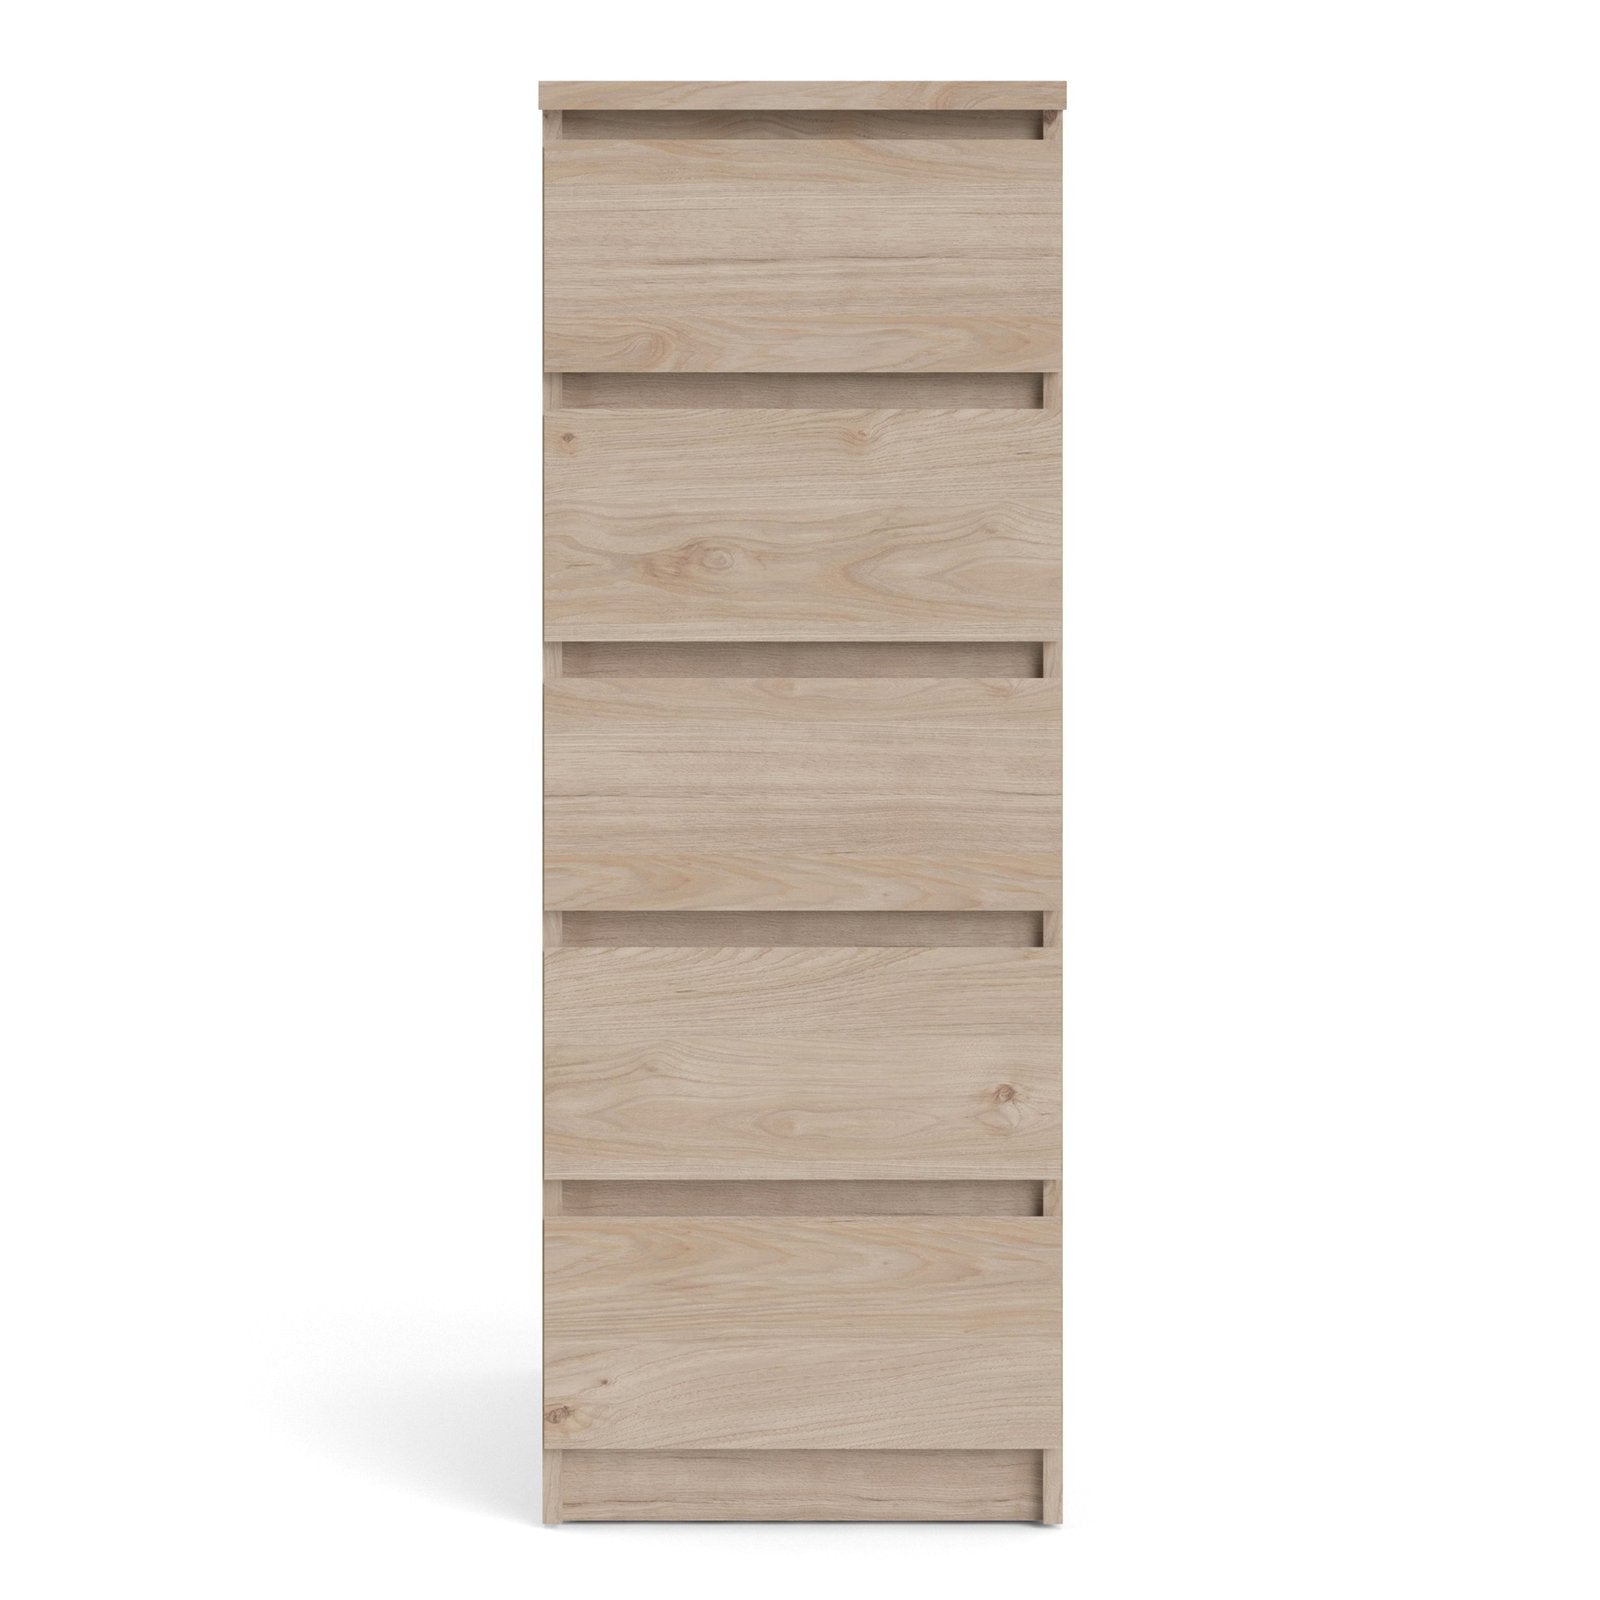 Naia Narrow Chest of 5 Drawers